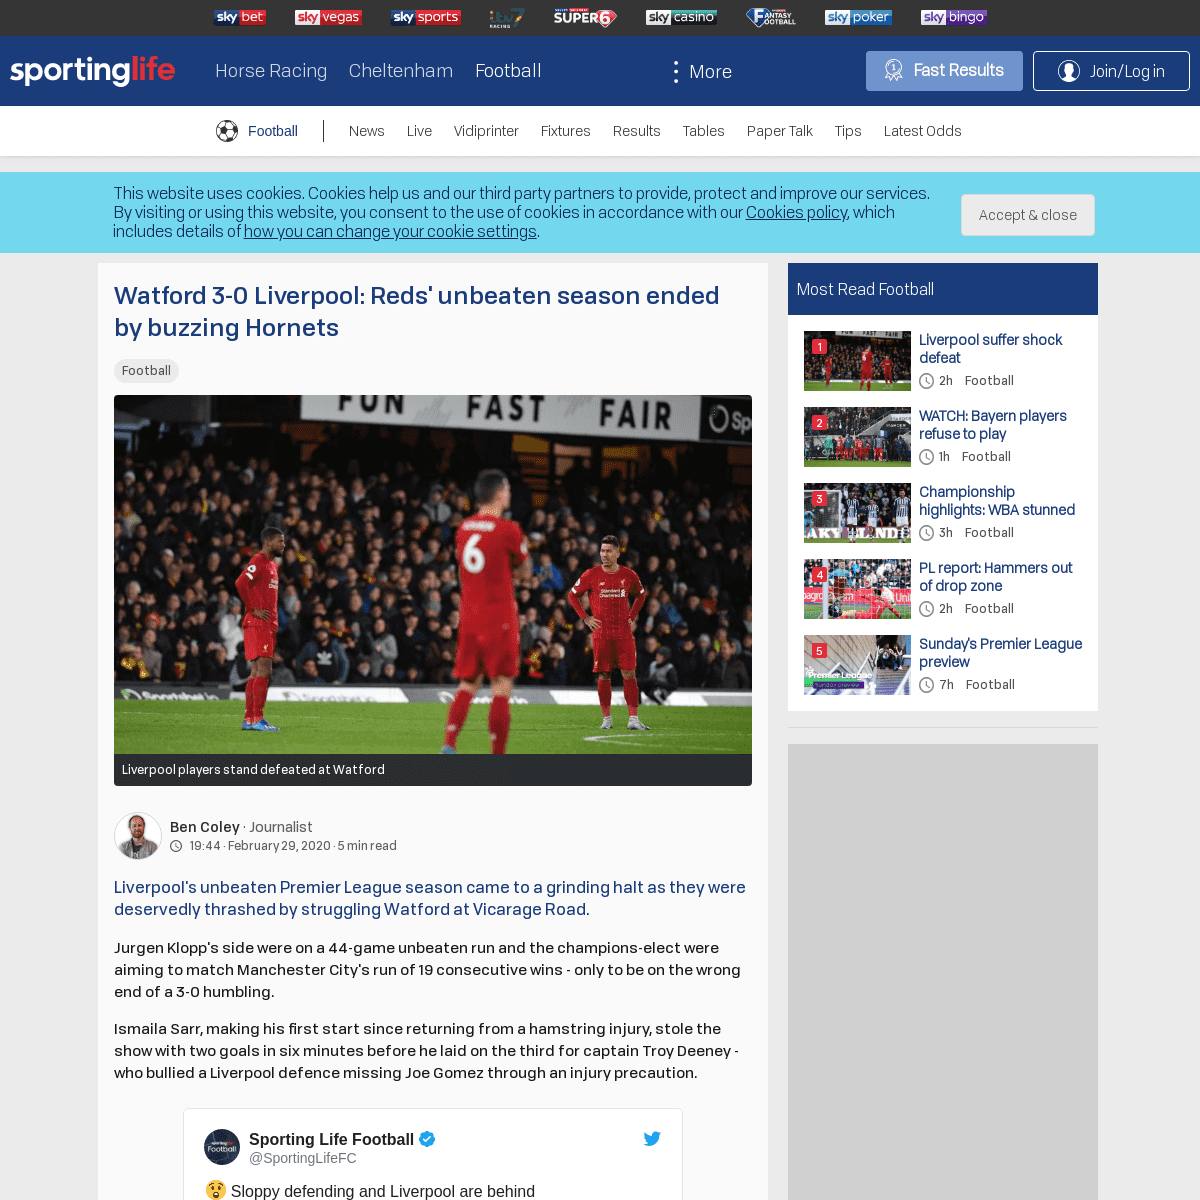 A complete backup of www.sportinglife.com/football/news/liverpool-suffer-shock-defeat/177872